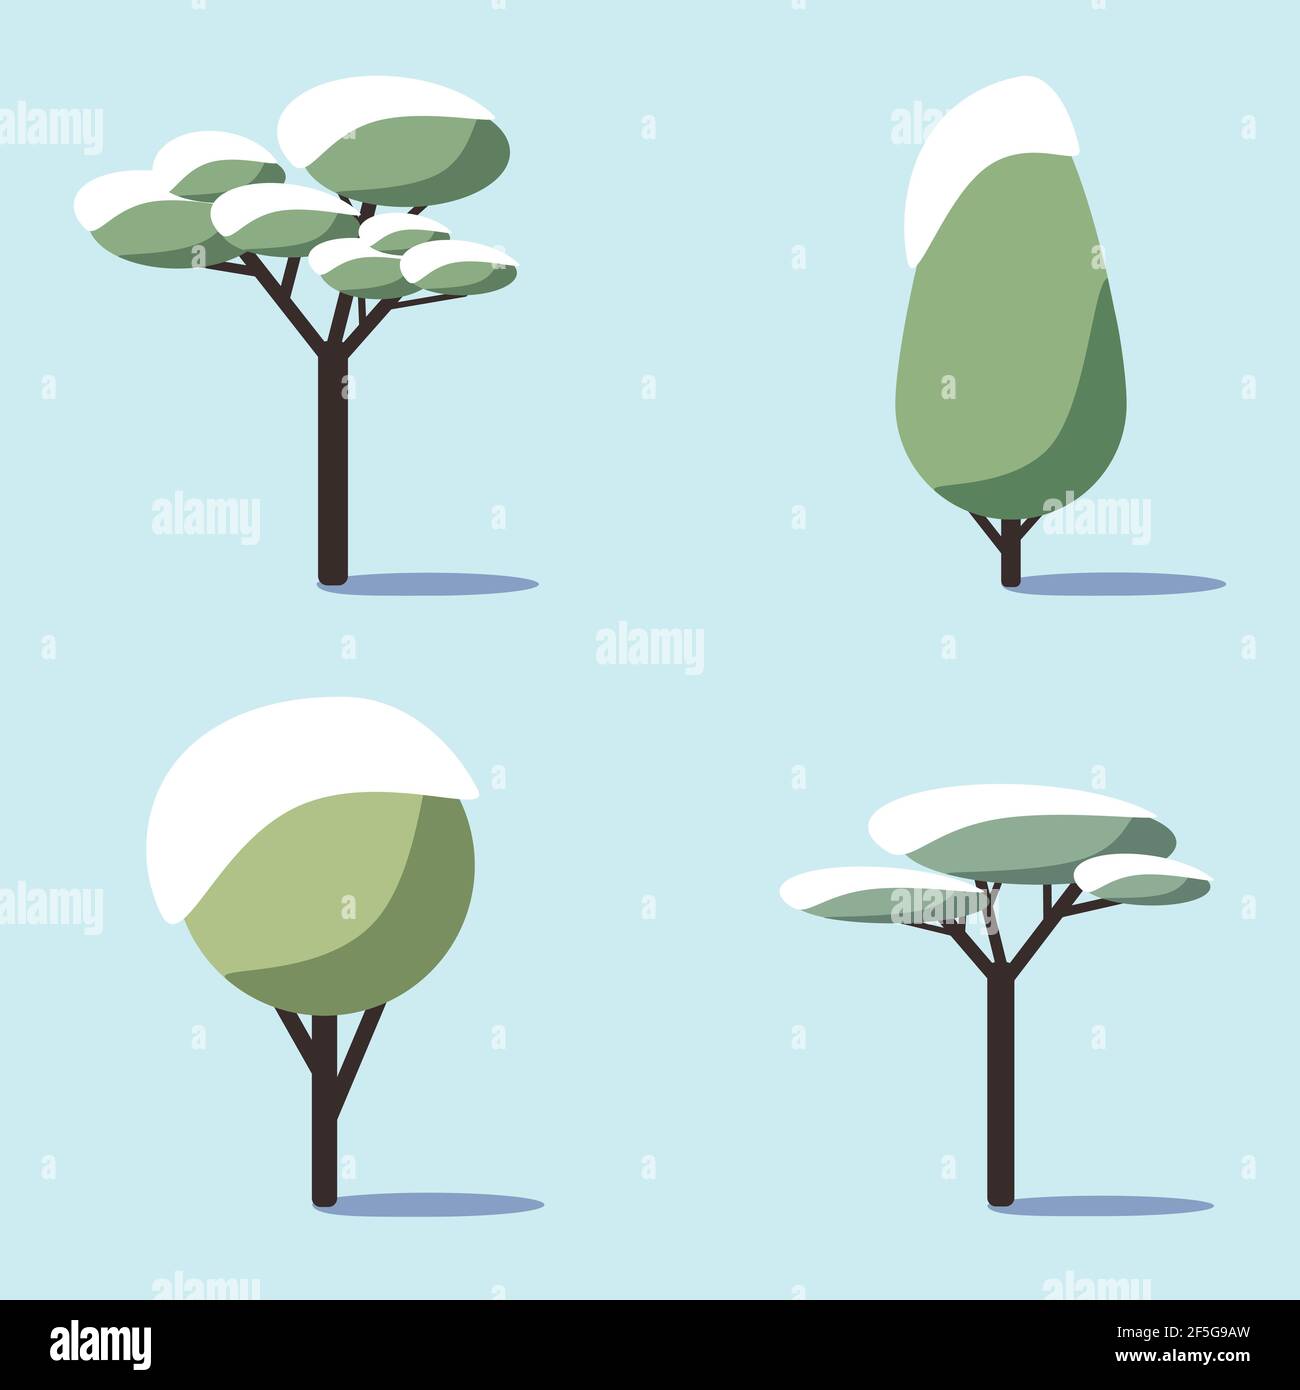 A set of green snow-covered deciduous trees with shadows. Design element for nature logo or banner. Vector illustration in the flat style on a blue ba Stock Vector